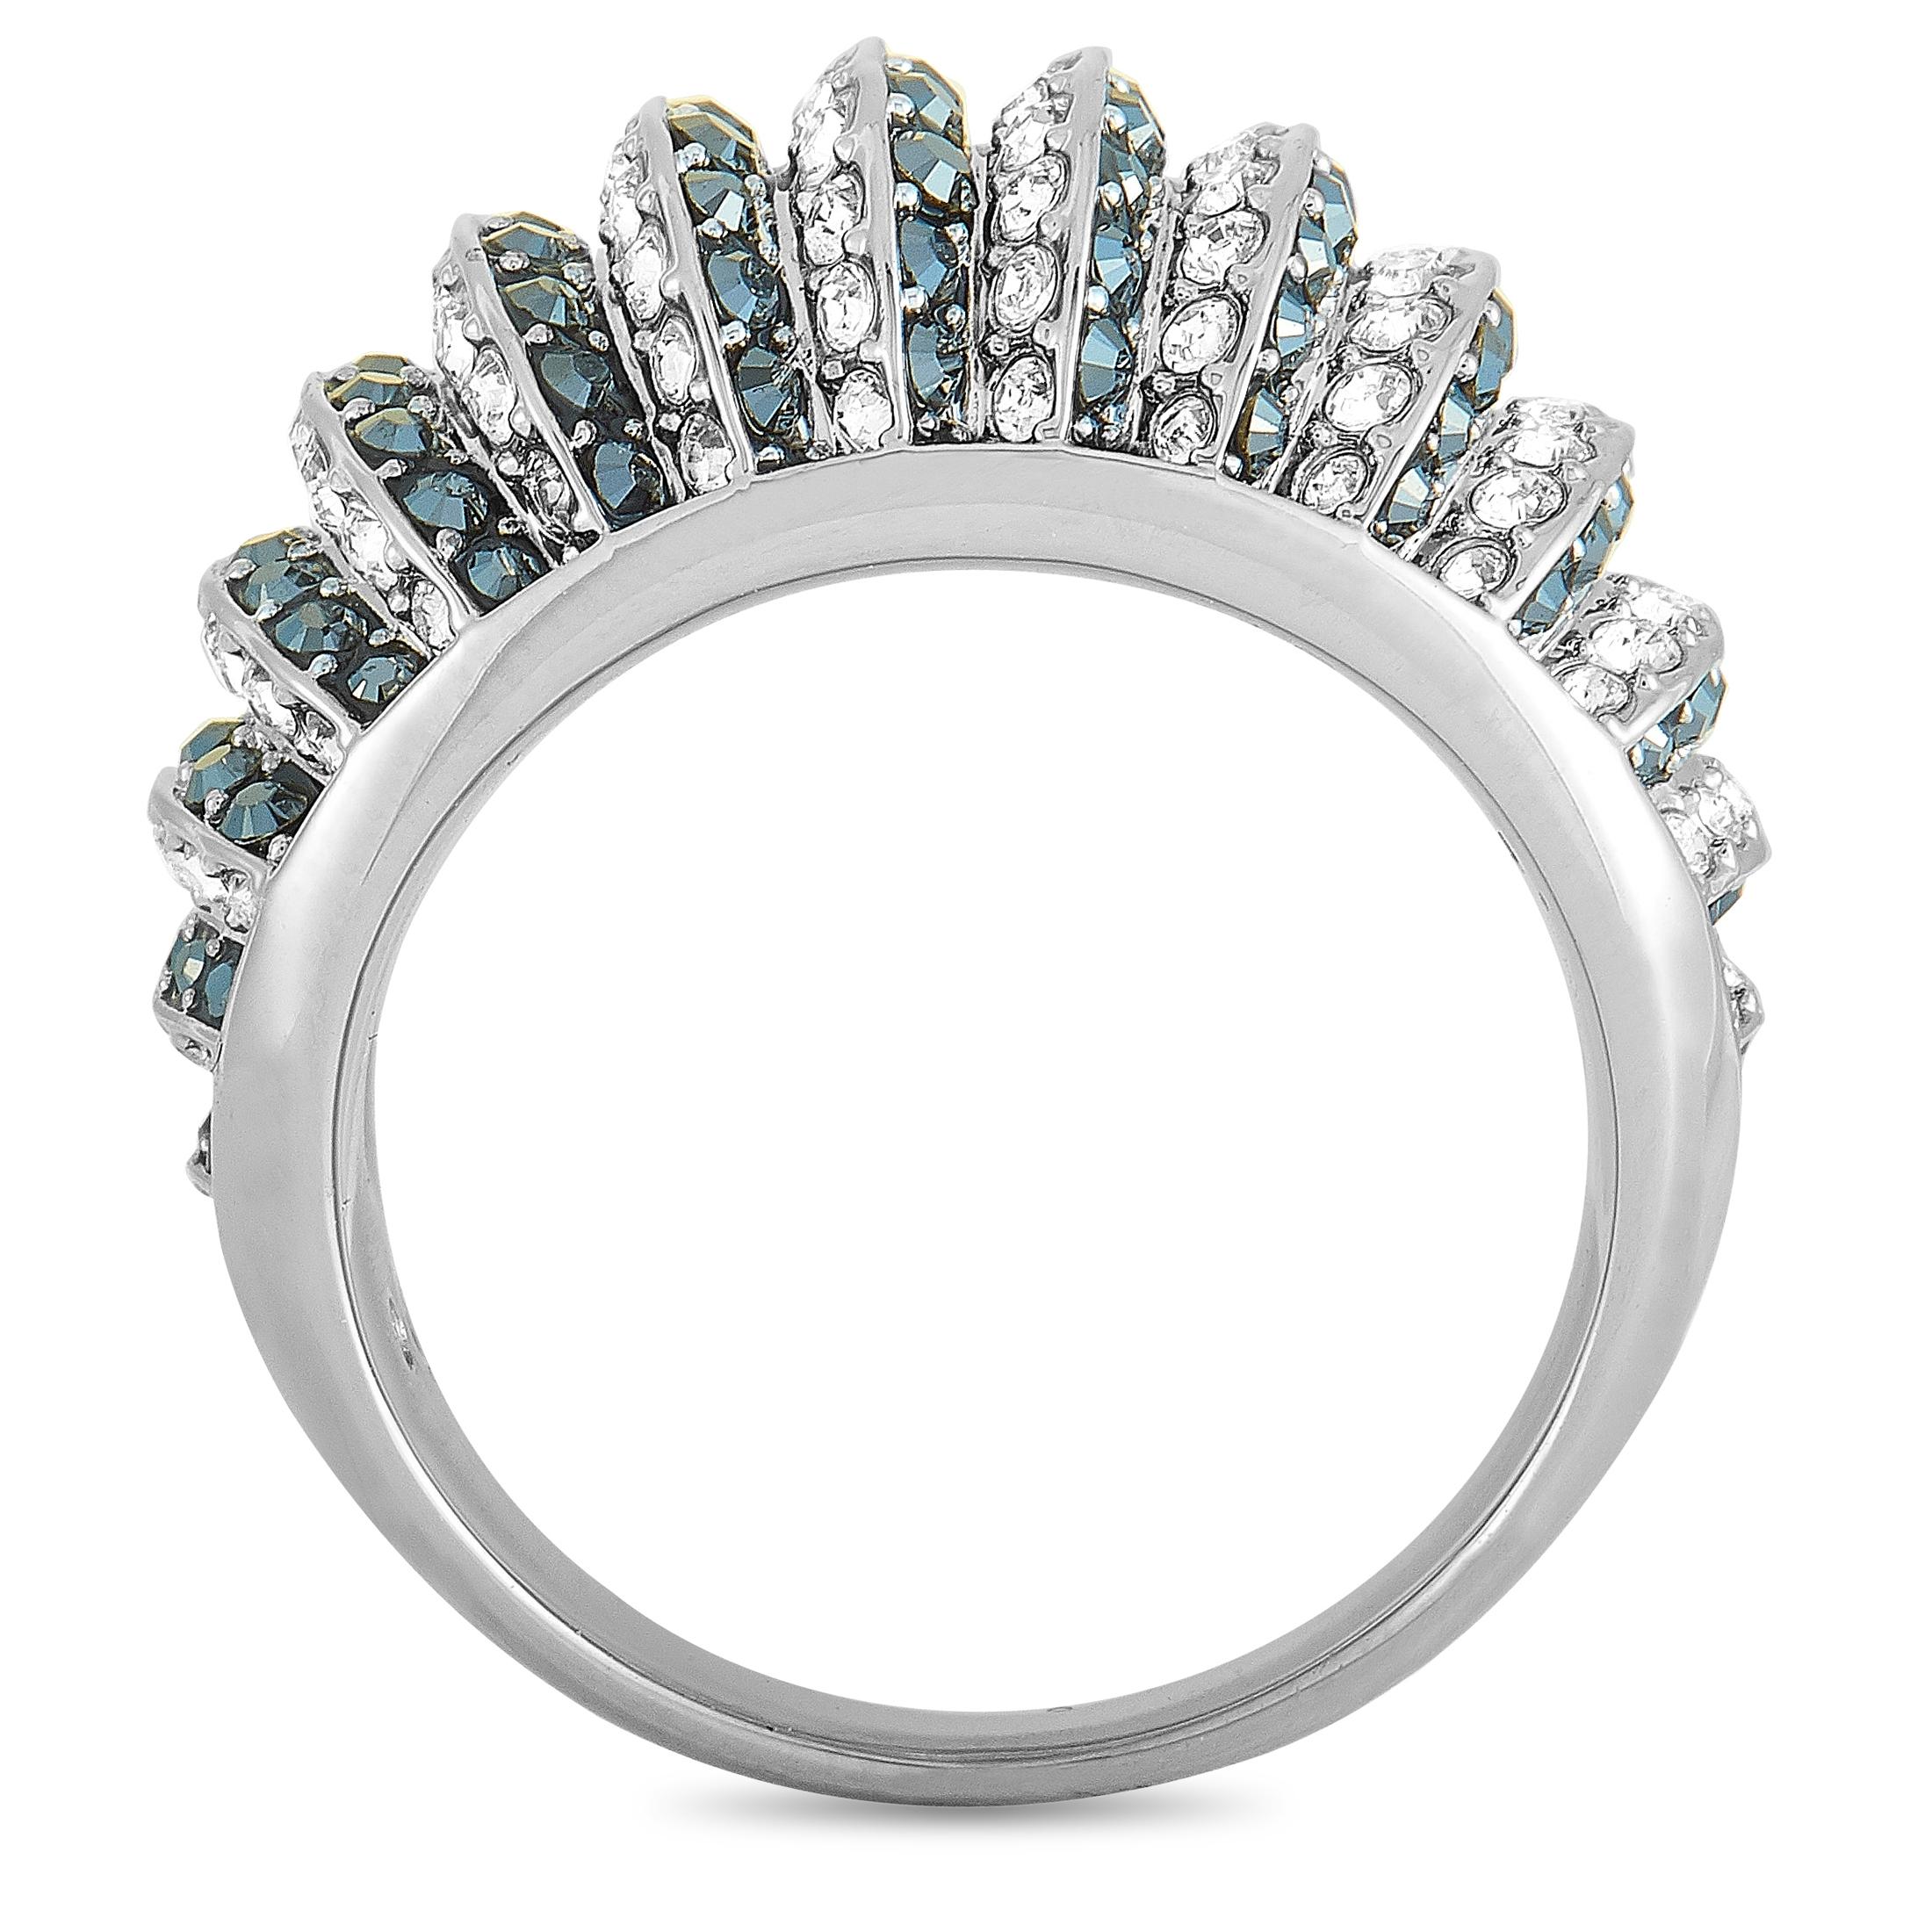 The Swarovski “Luxury” ring is made of rhodium-plated stainless steel and embellished with black and clear Swarovski crystals. The ring weighs 8.5 grams, boasting band thickness of 3 mm and top height of 7 mm, while top dimensions measure 22 by 12